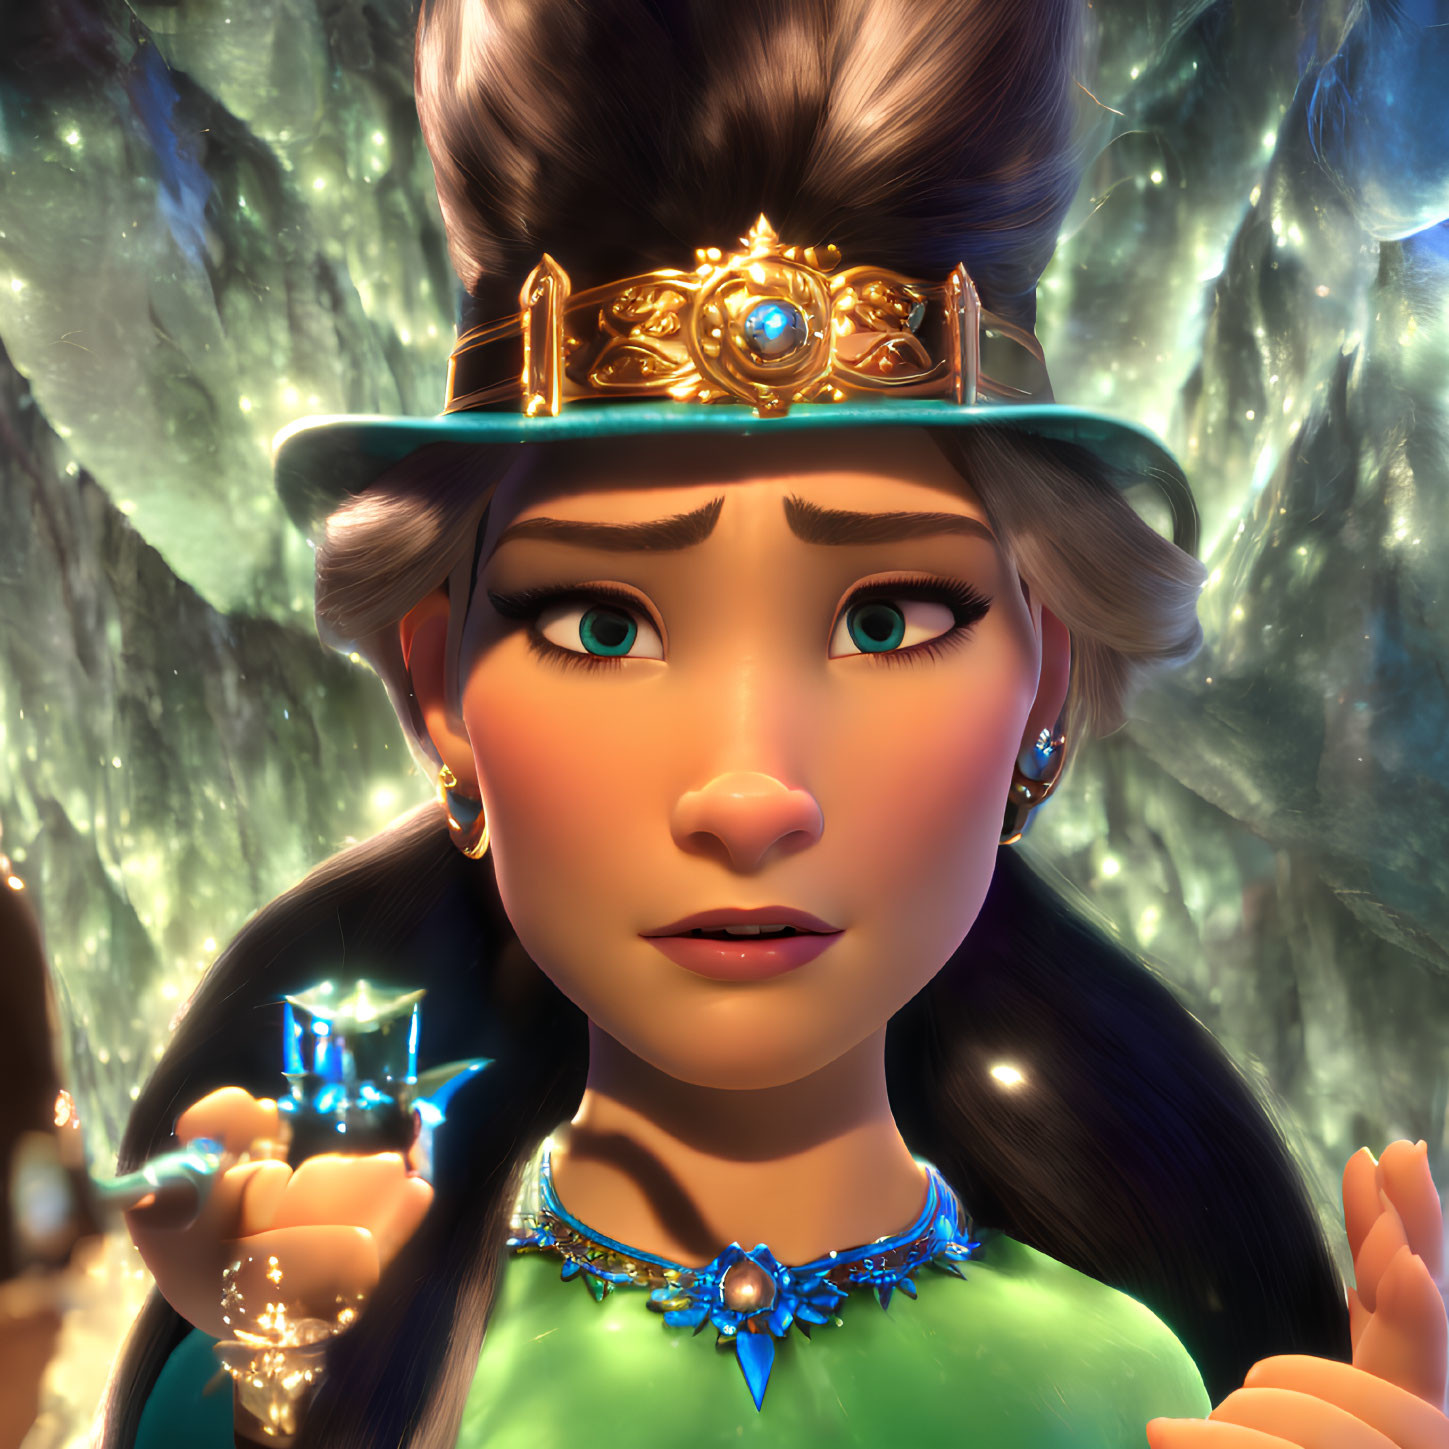 Animated female character with crown in crystal cave holding glowing blue object